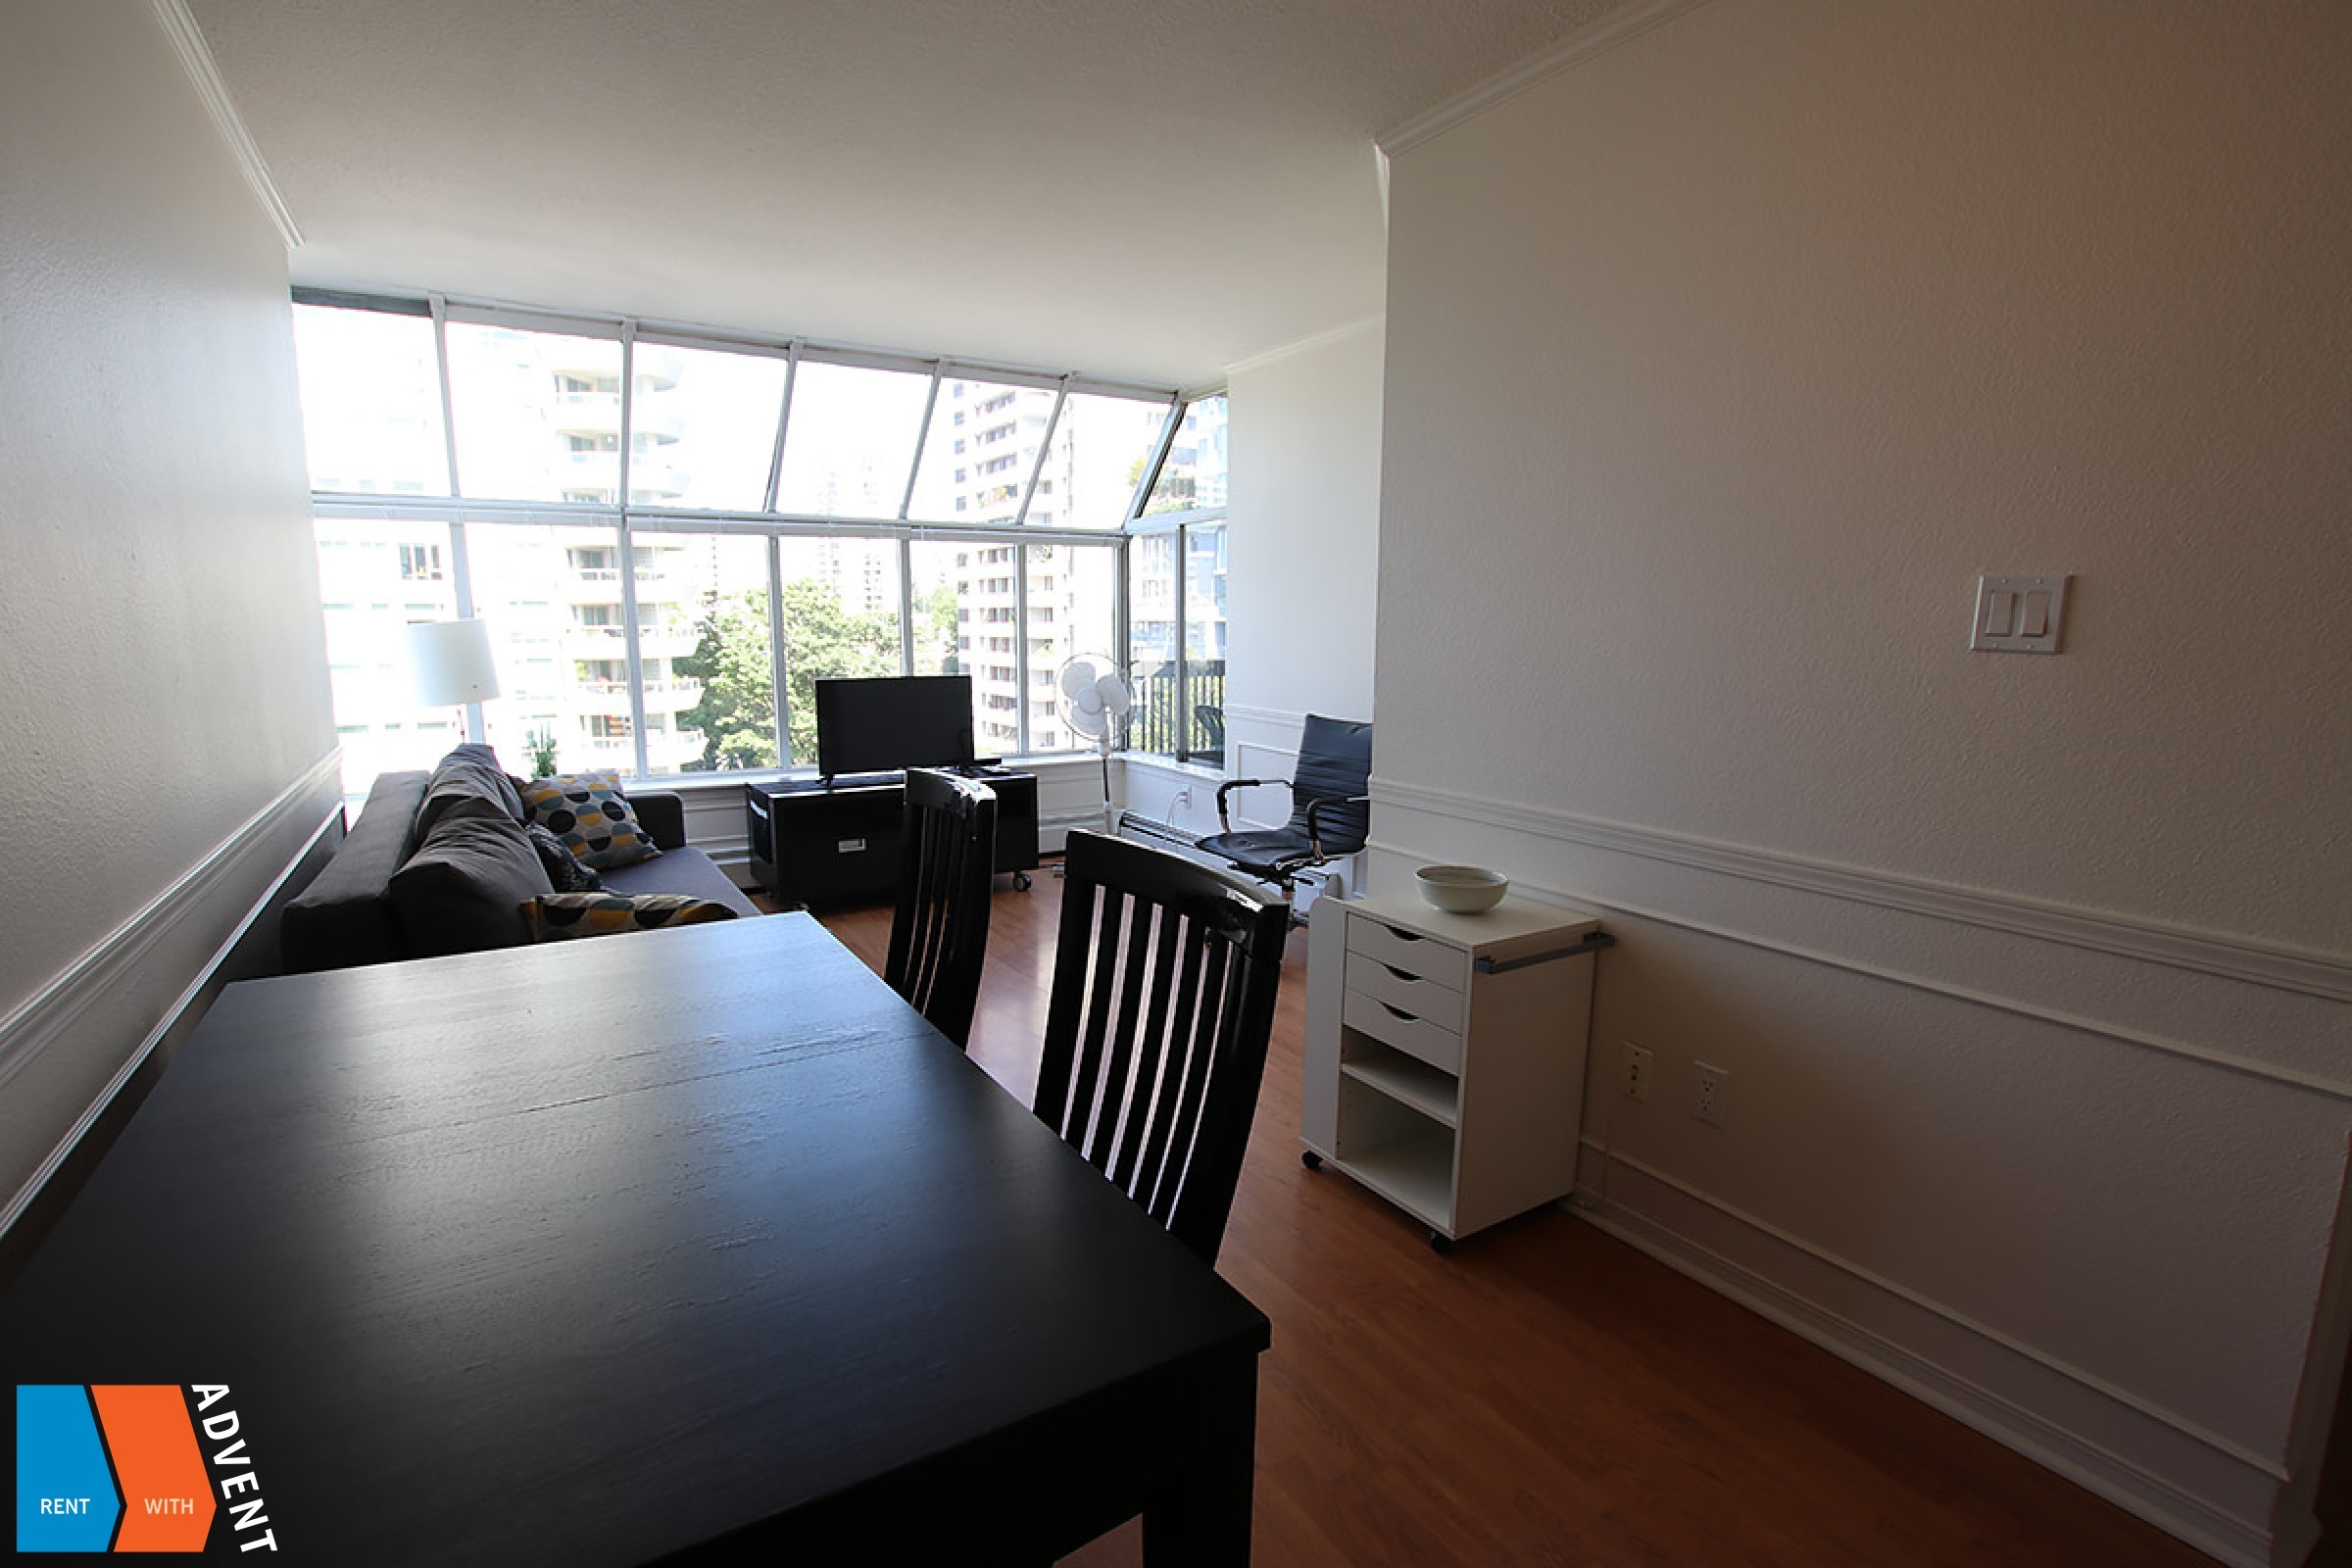 Anchor Point 1 Bed Apartment Rental With City Views & Balcony in Downtown Vancouver. 808 - 1330 Burrard Street, Vancouver, BC, Canada.